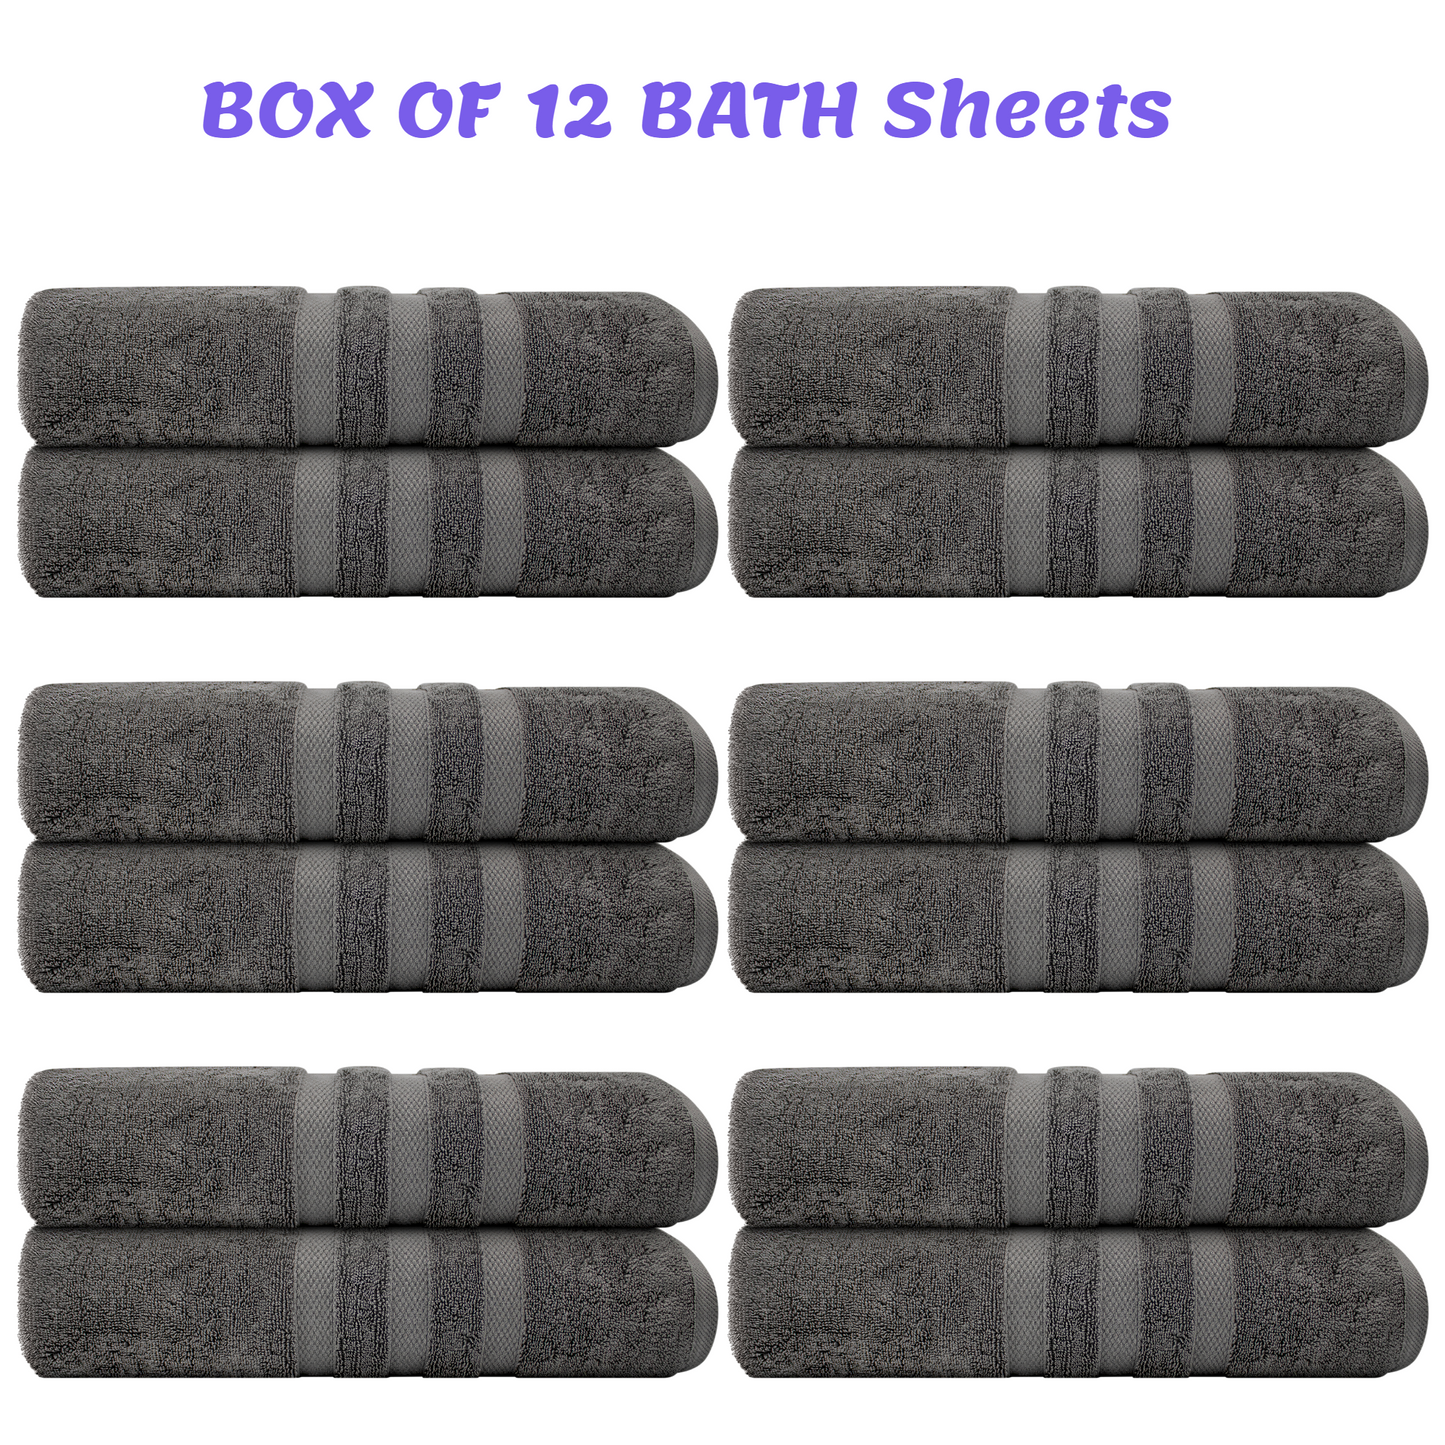 Wholesale Turkwell Bath Sheets Towels, 100% Combed Cotton, 35x70 in, Extra Large, Gray, BOX of 12